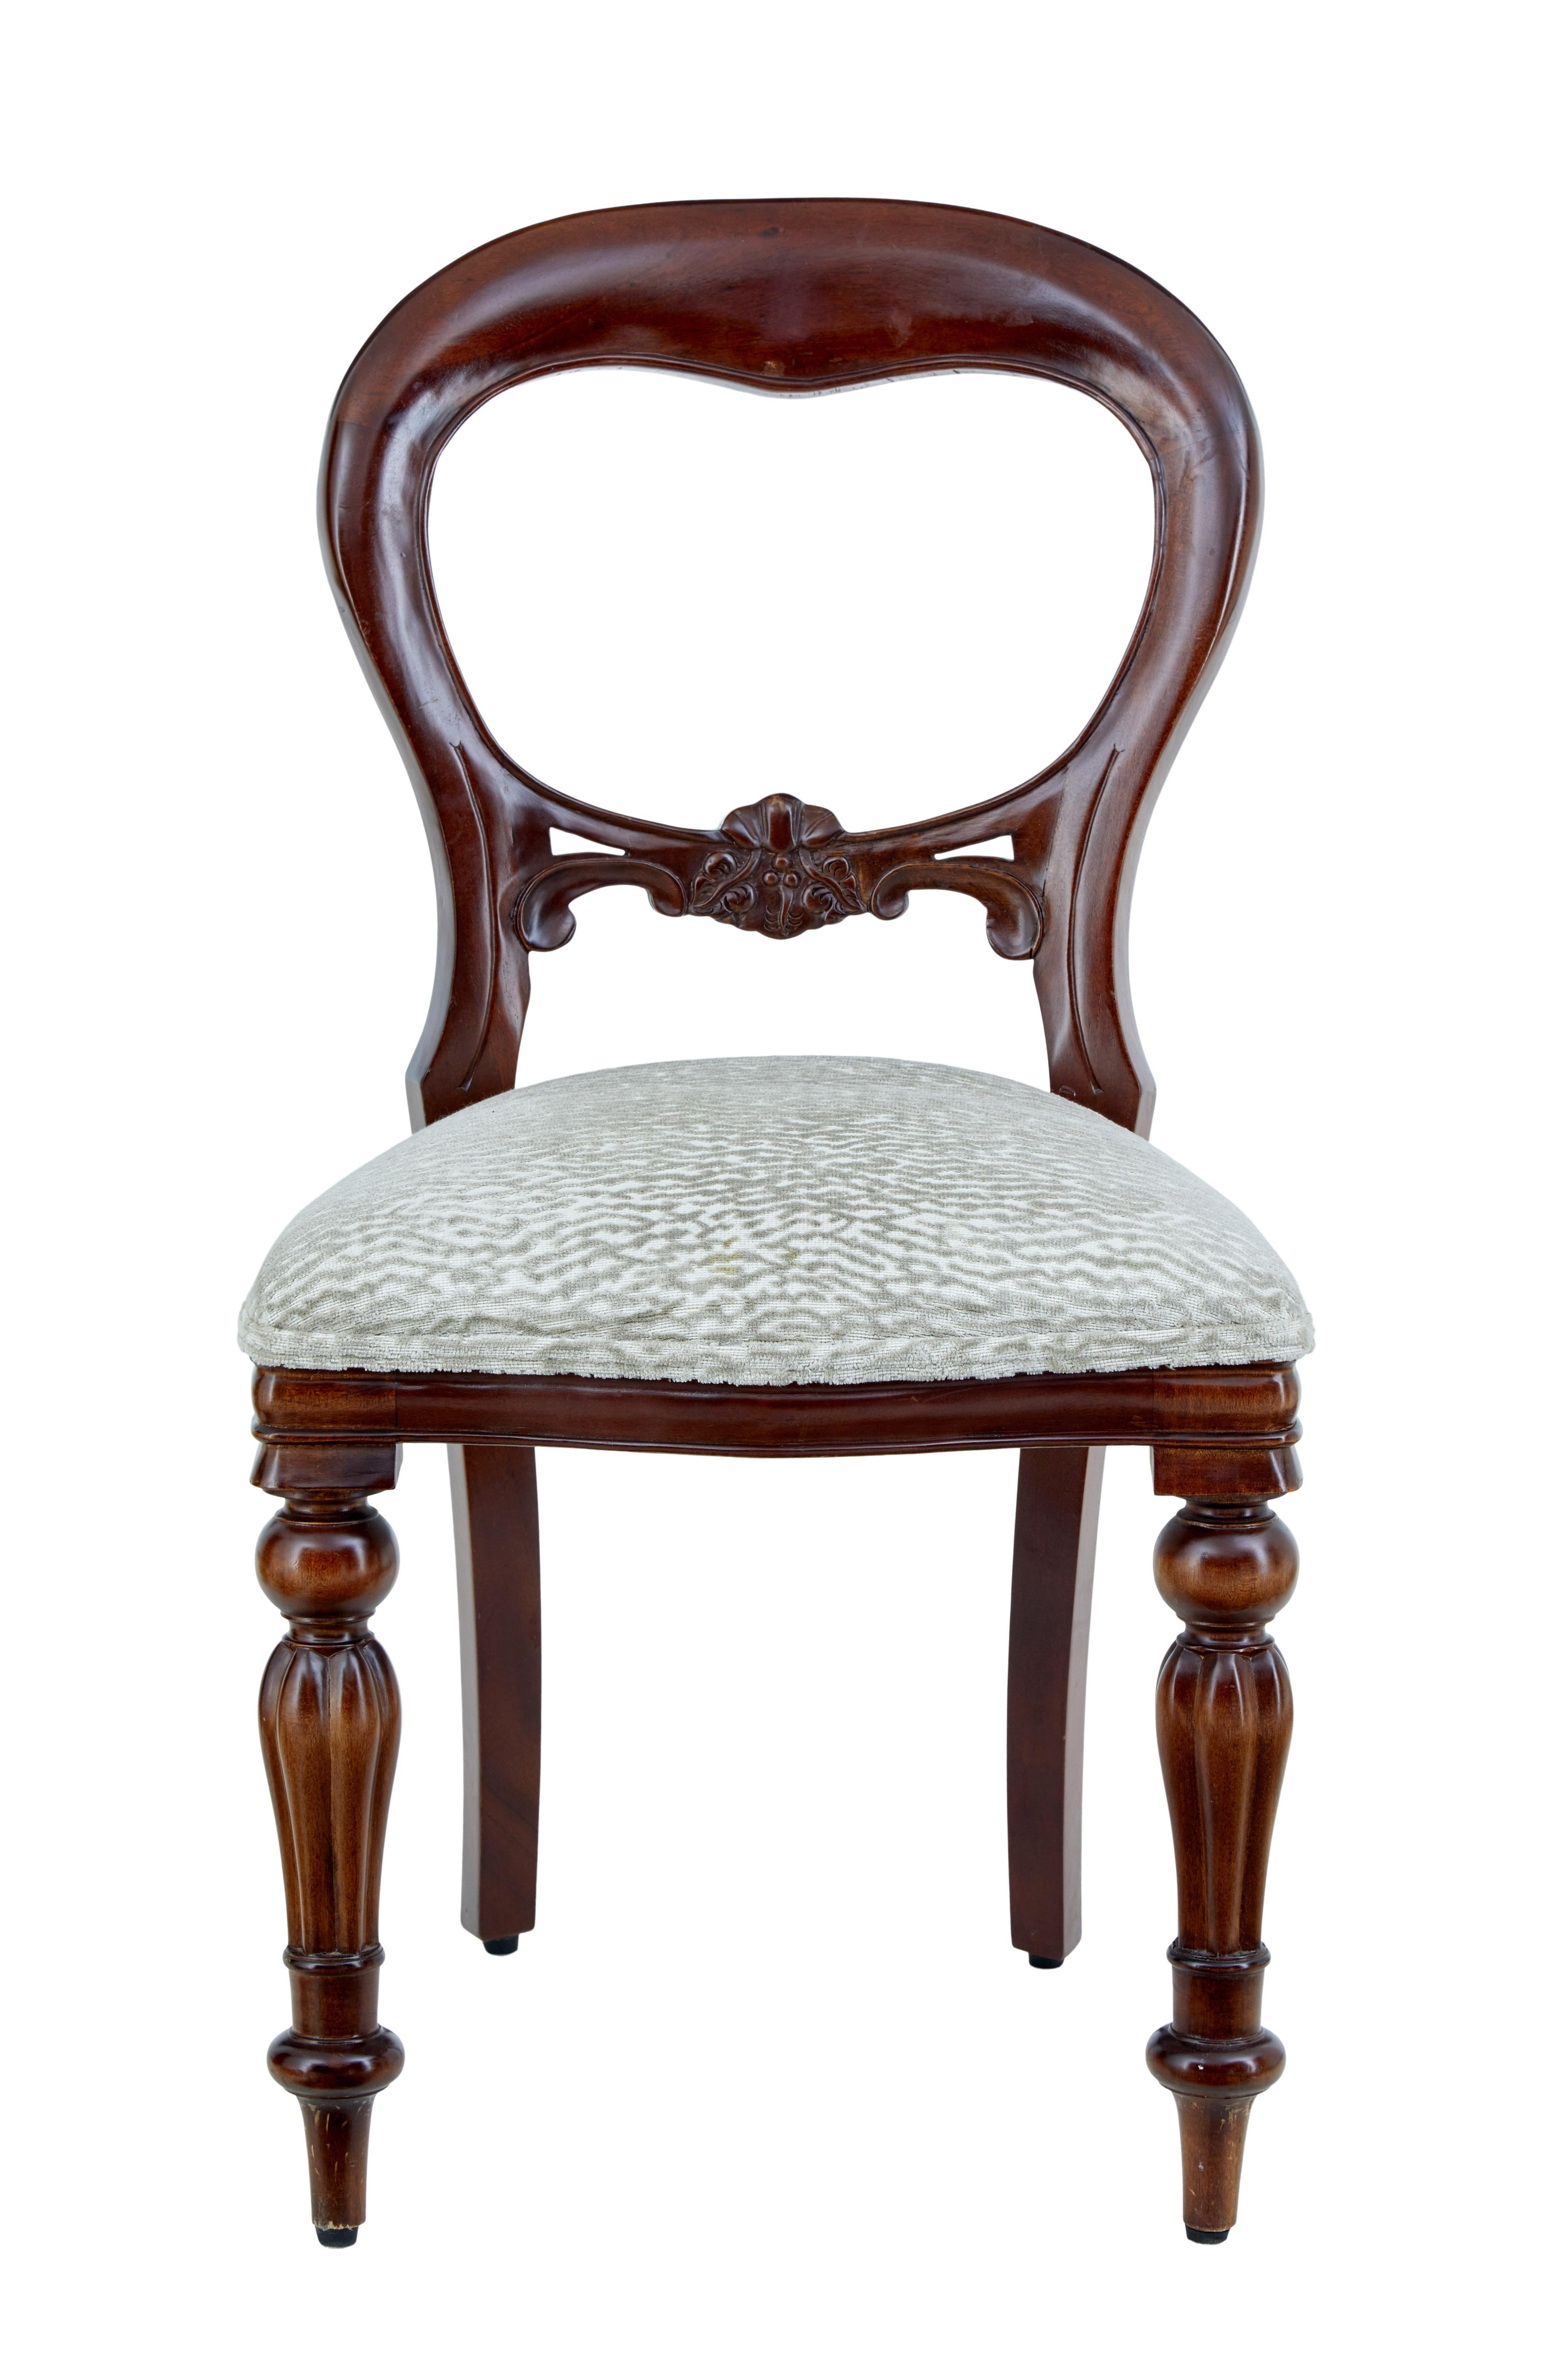 Good quality set of mahogany dining chairs.

Comprising of 2 carvers and 10 single chairs.

Reproduction mahogany chairs from a Victorian balloon back design.

Balloon back with carved backrest detail. Standing on front fluted legs and tapered legs